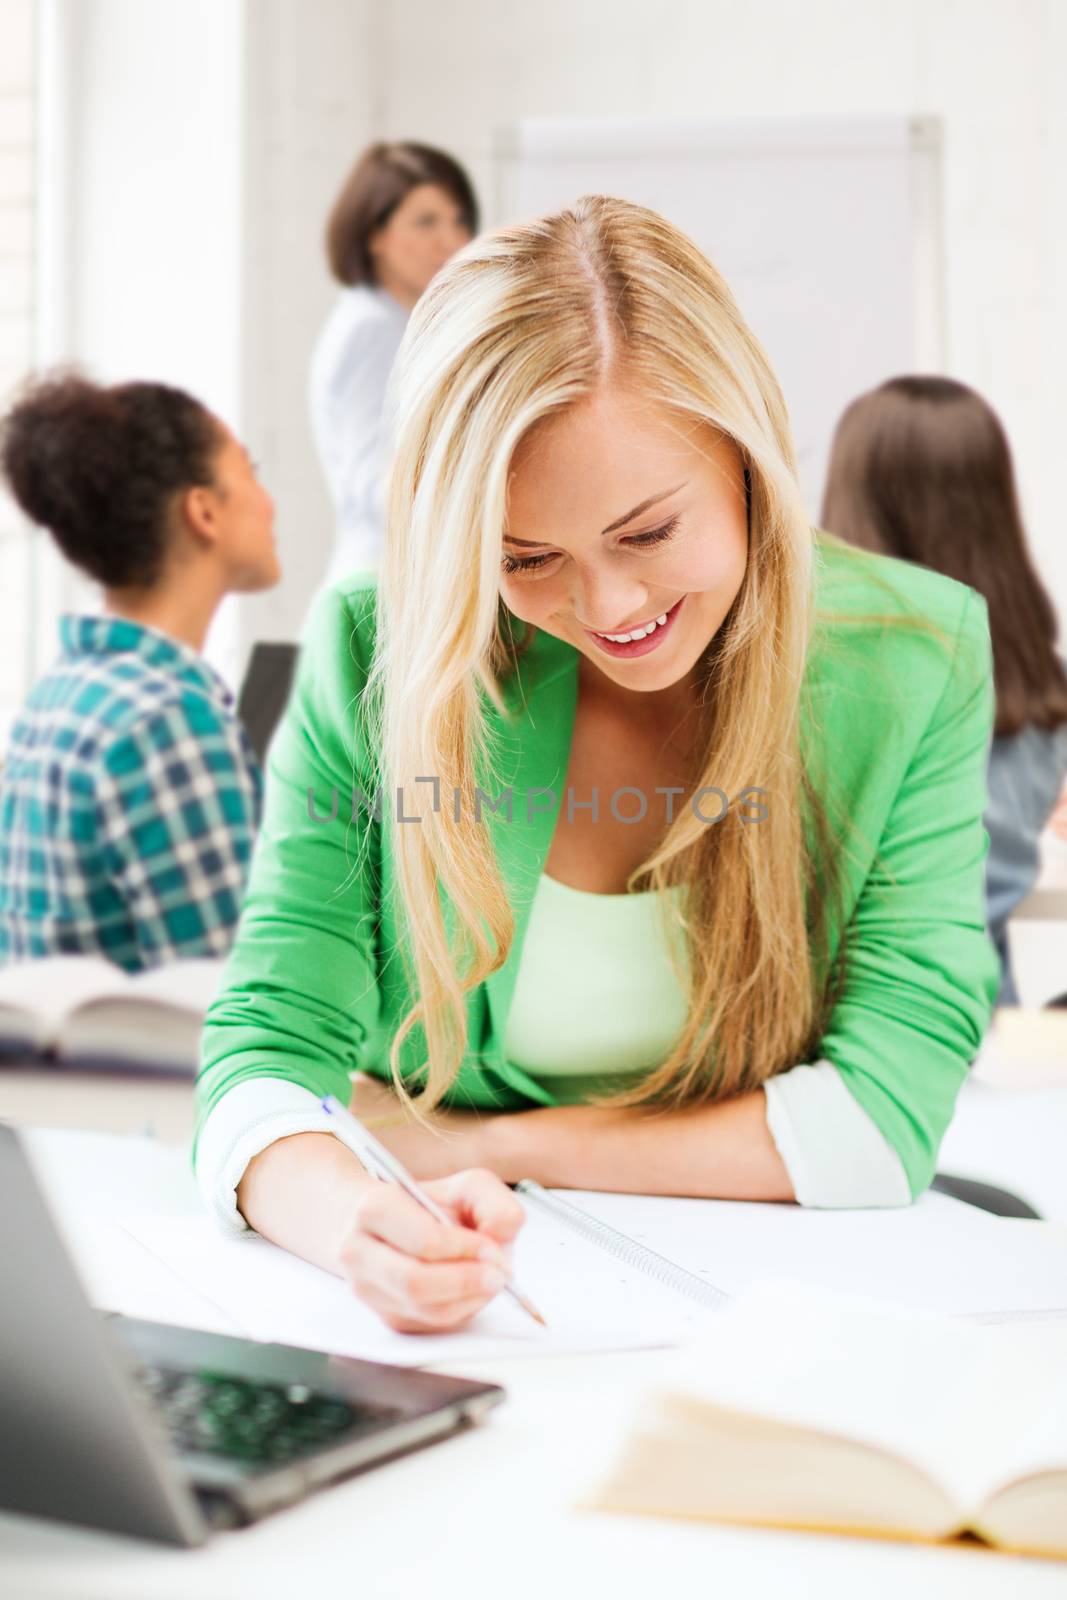 student girl writing in notebook at school by dolgachov